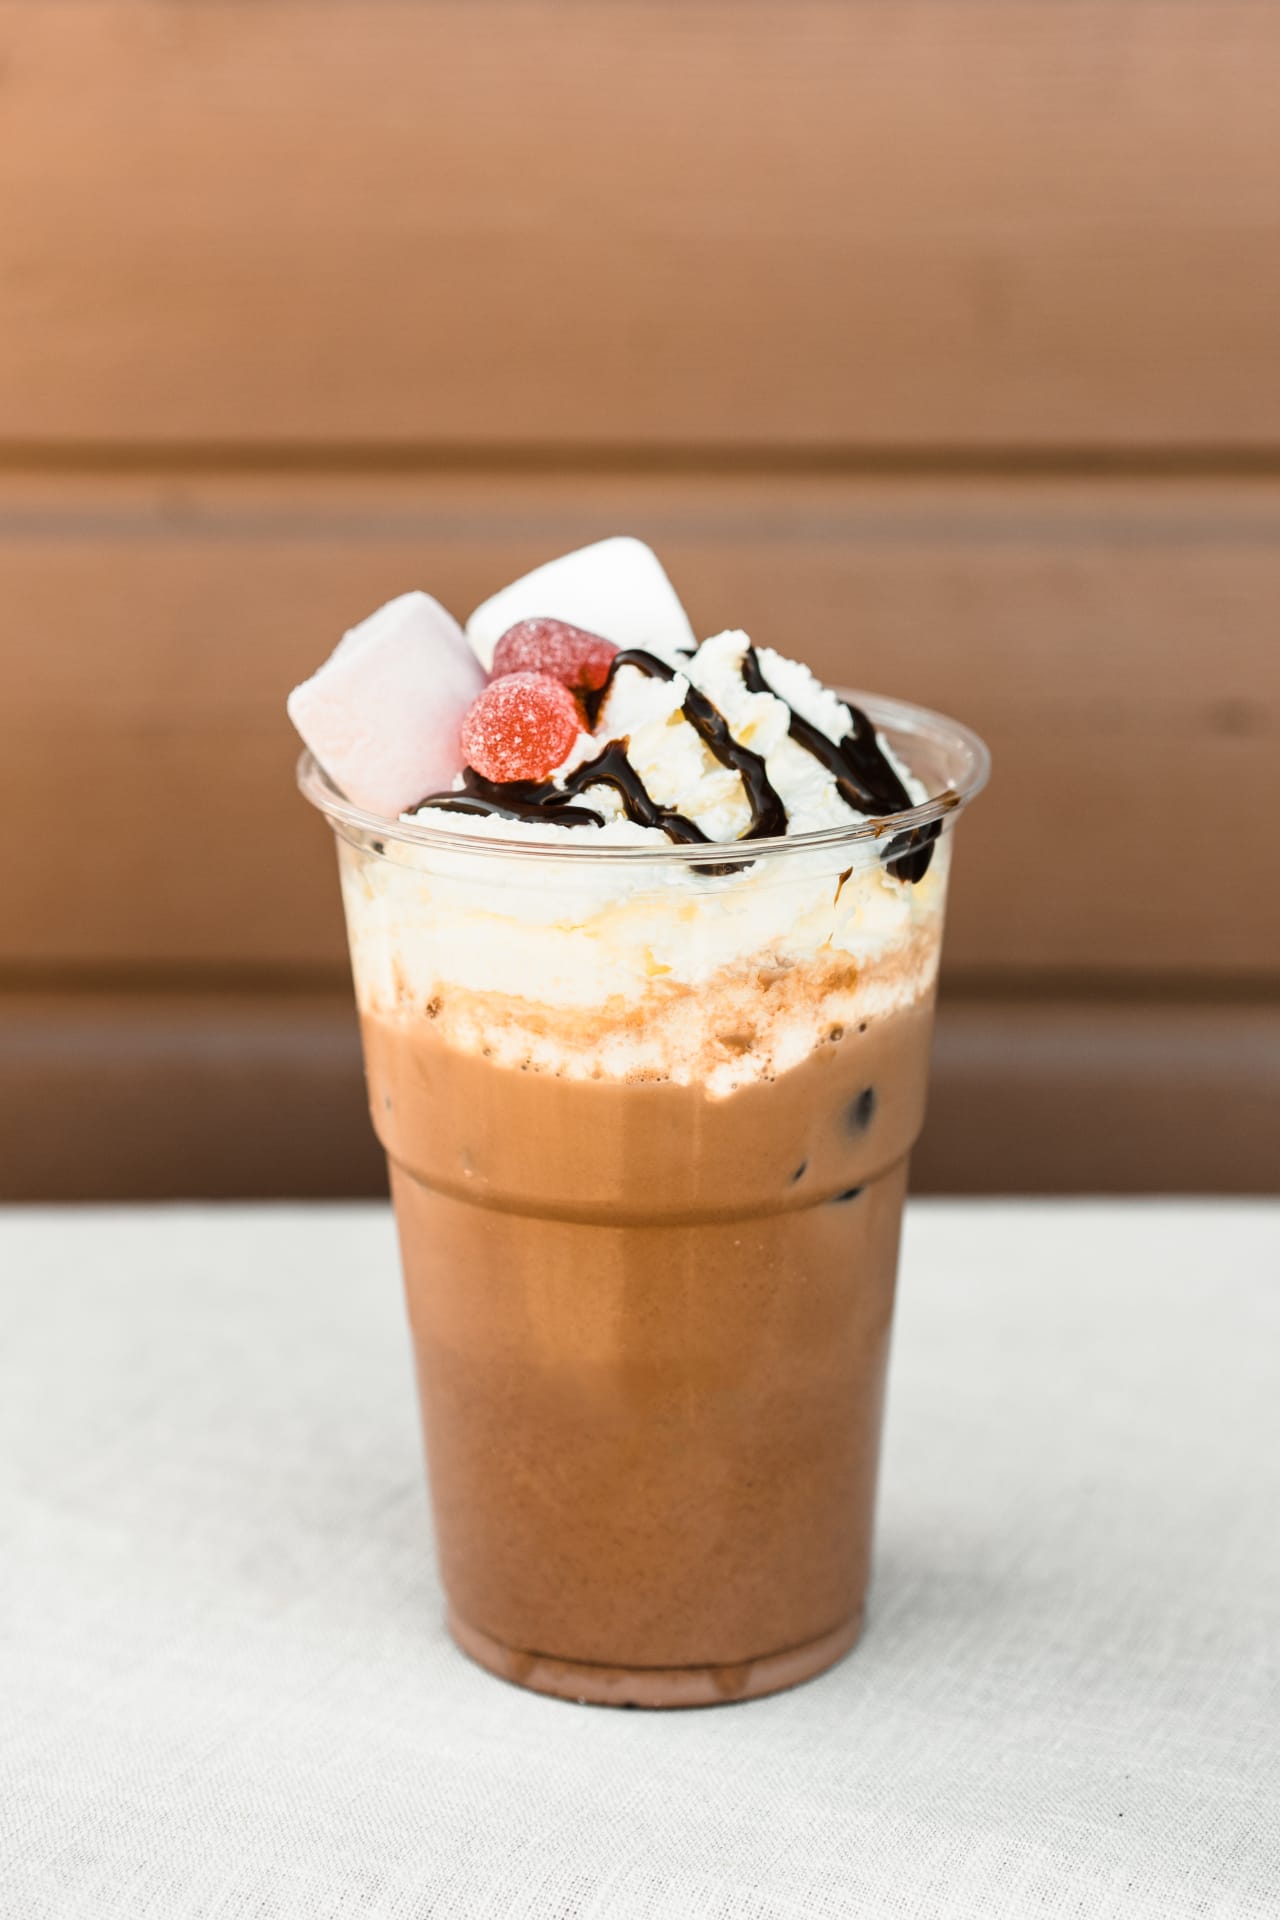 Hot or cold chocolate